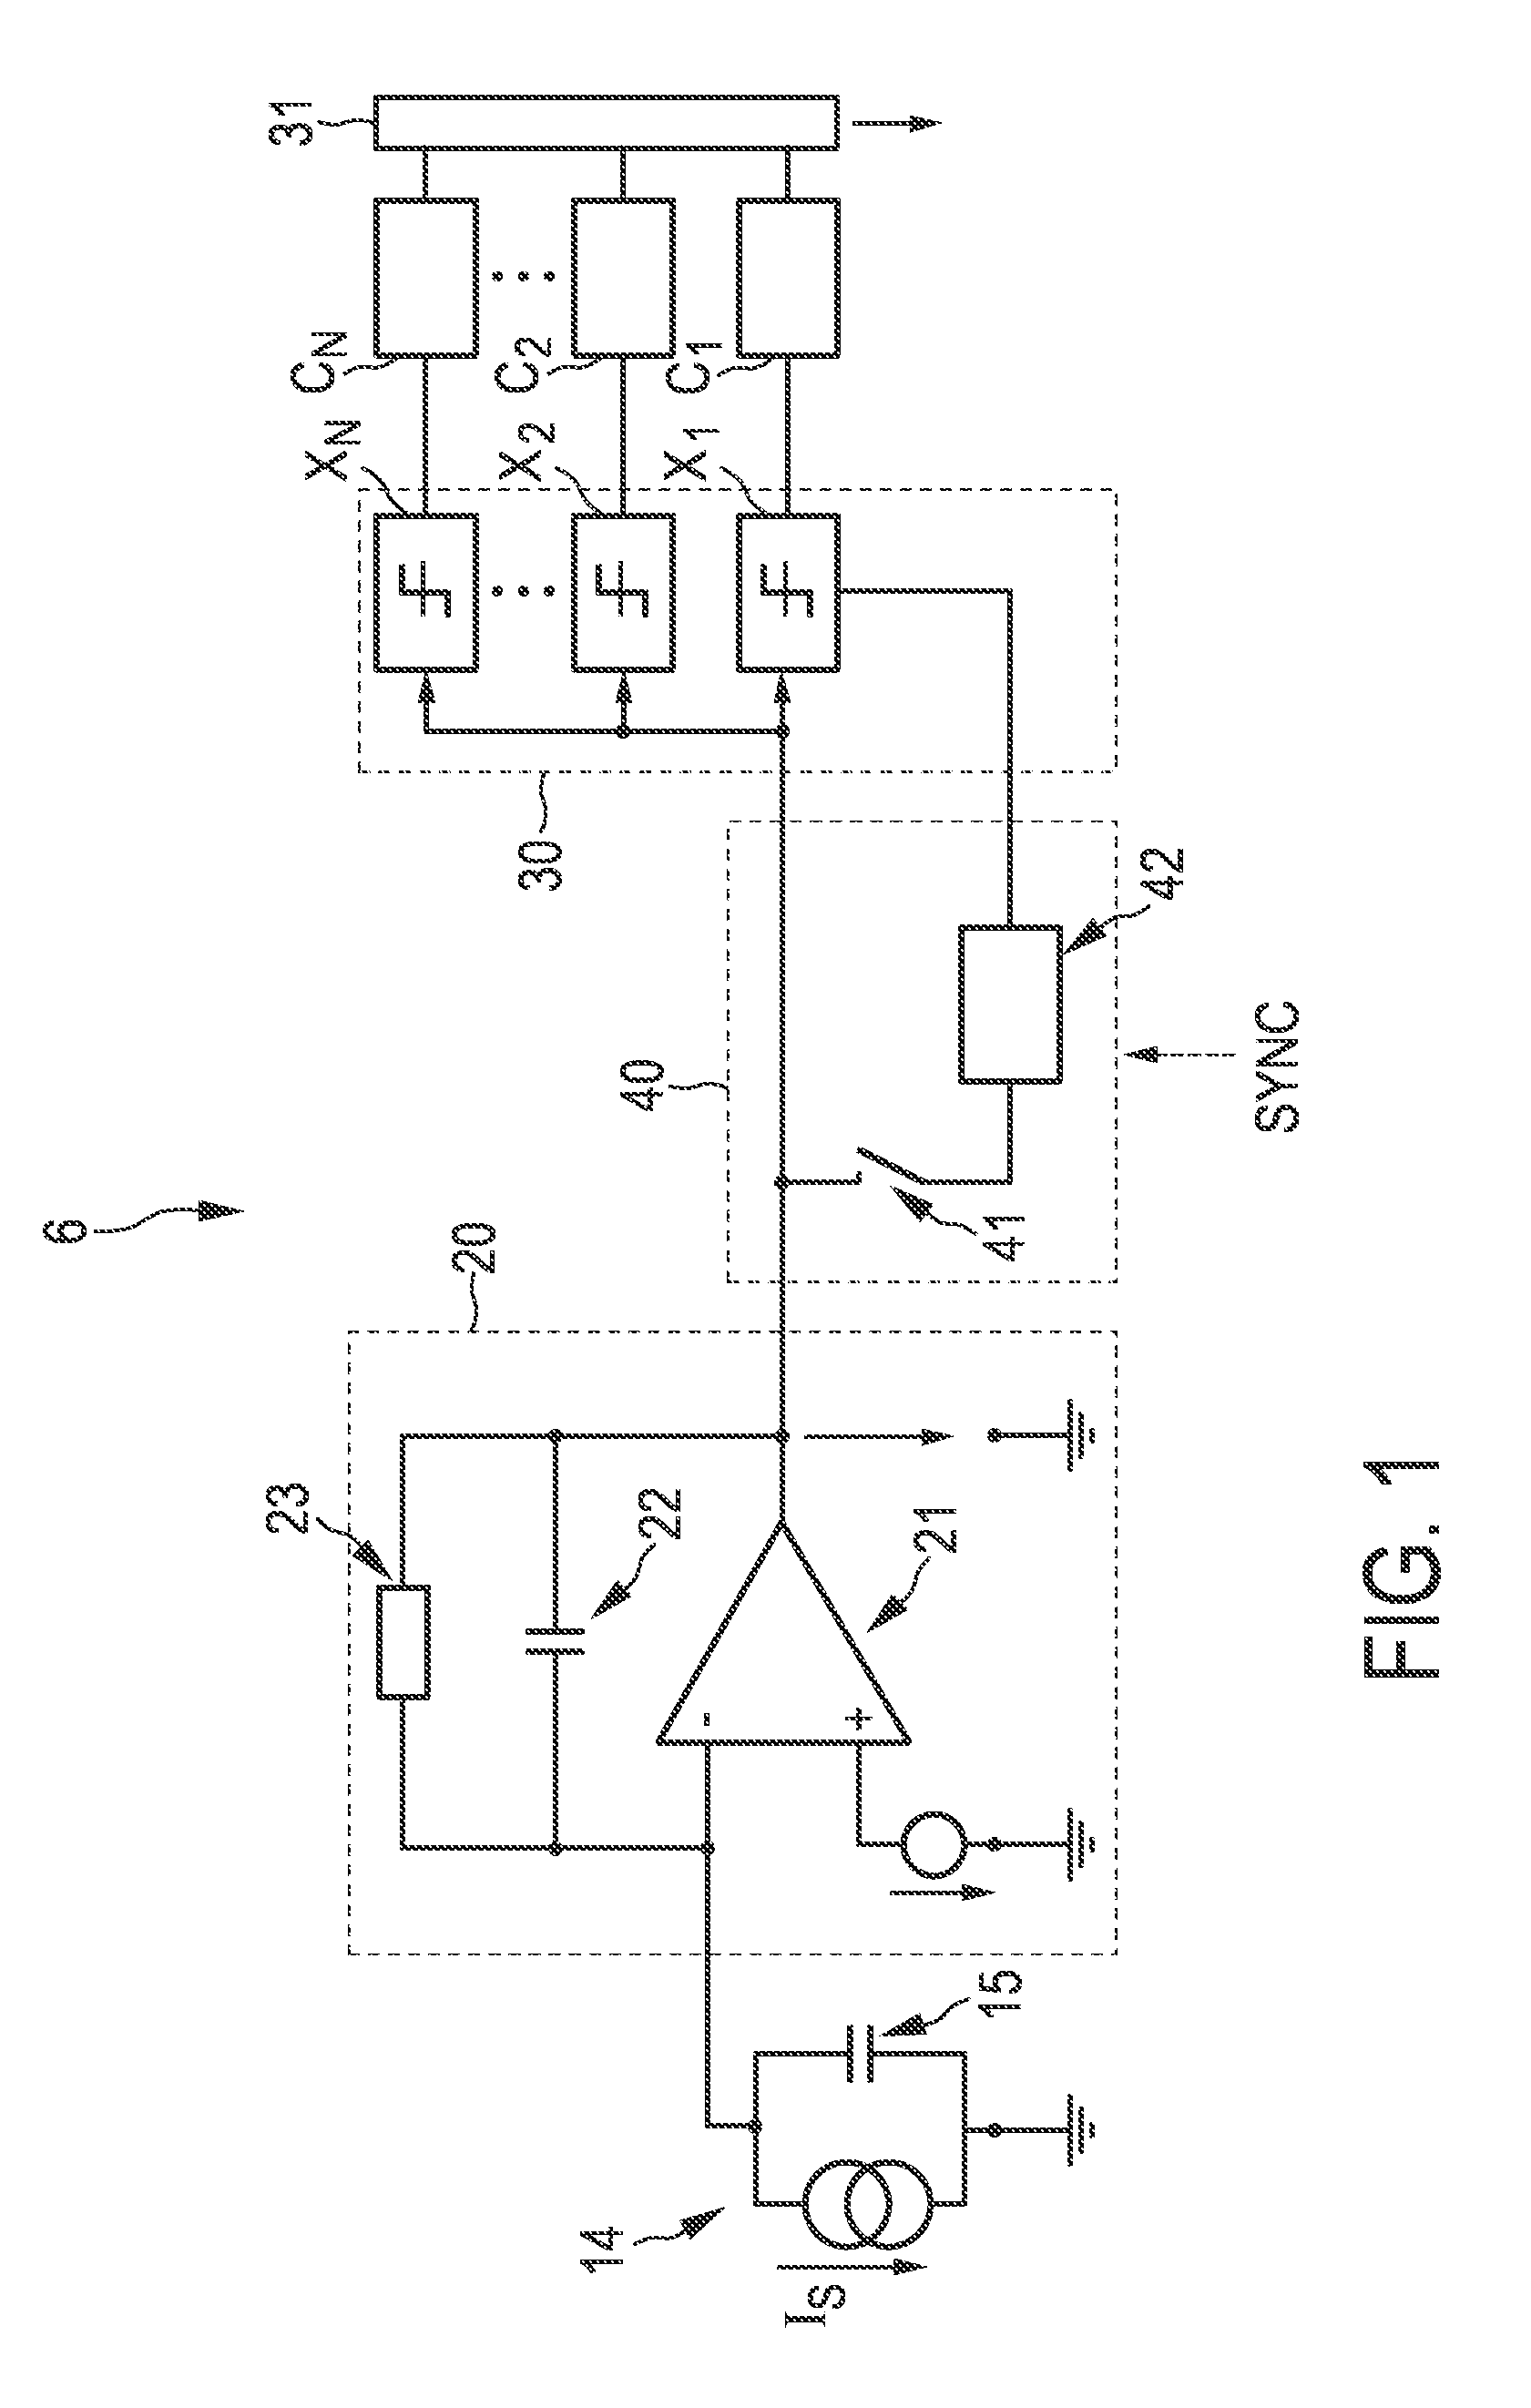 Detection device for detecting photons emitted by a radiation source